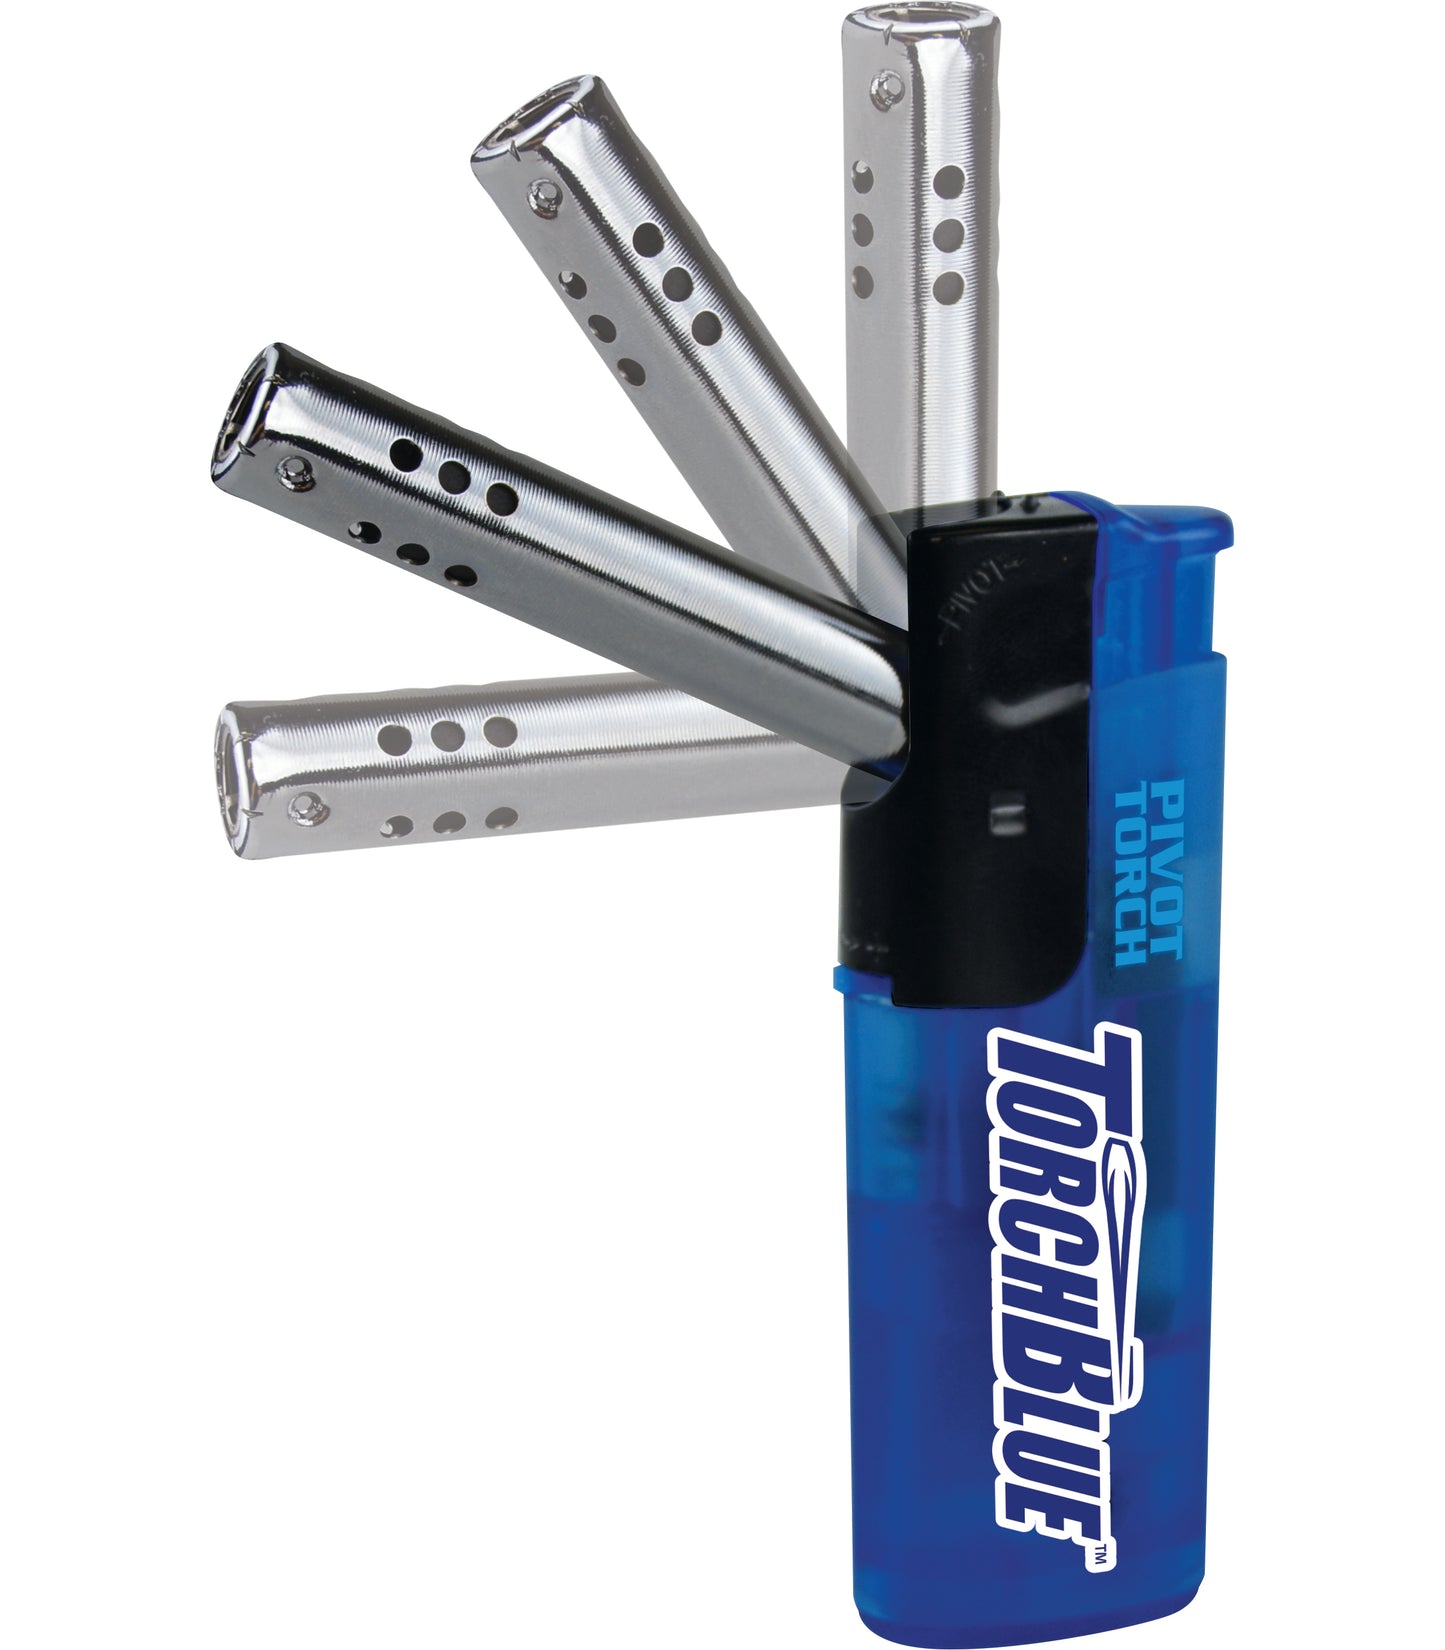 ITEM NUMBER 022485 TORCH BLUE LIGHTER 25 PIECES PER DISPLAY